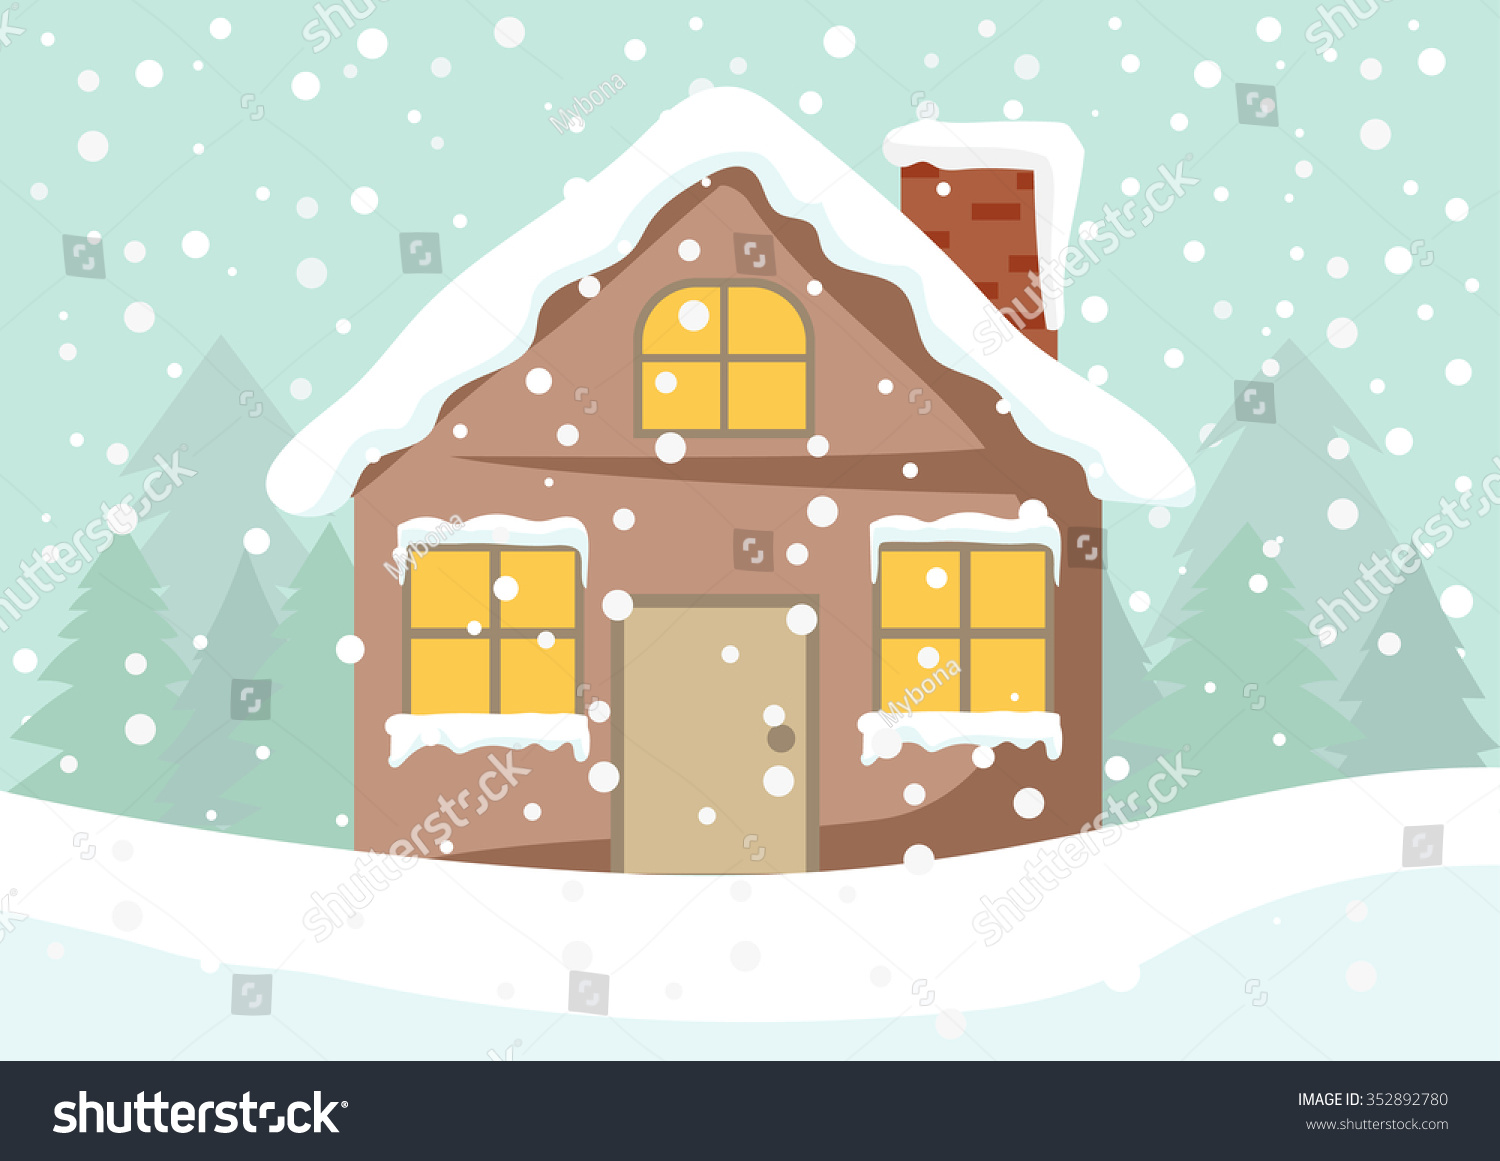 house with snow clipart - photo #5